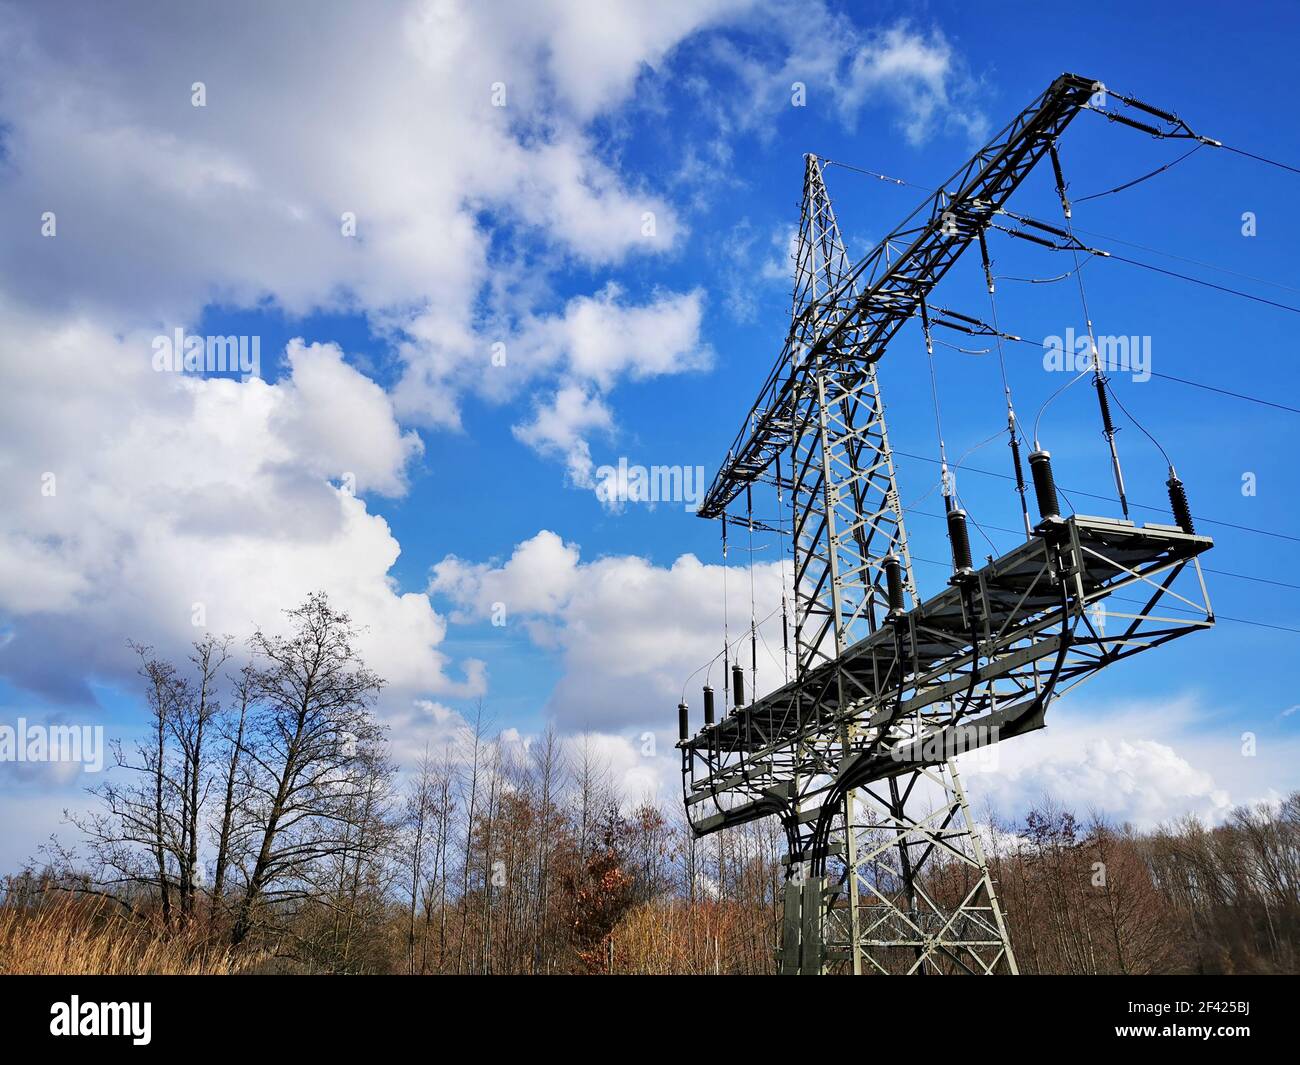 Power supply over land, high voltage pylon in landscape under cloudy sky, environmental stress Stock Photo